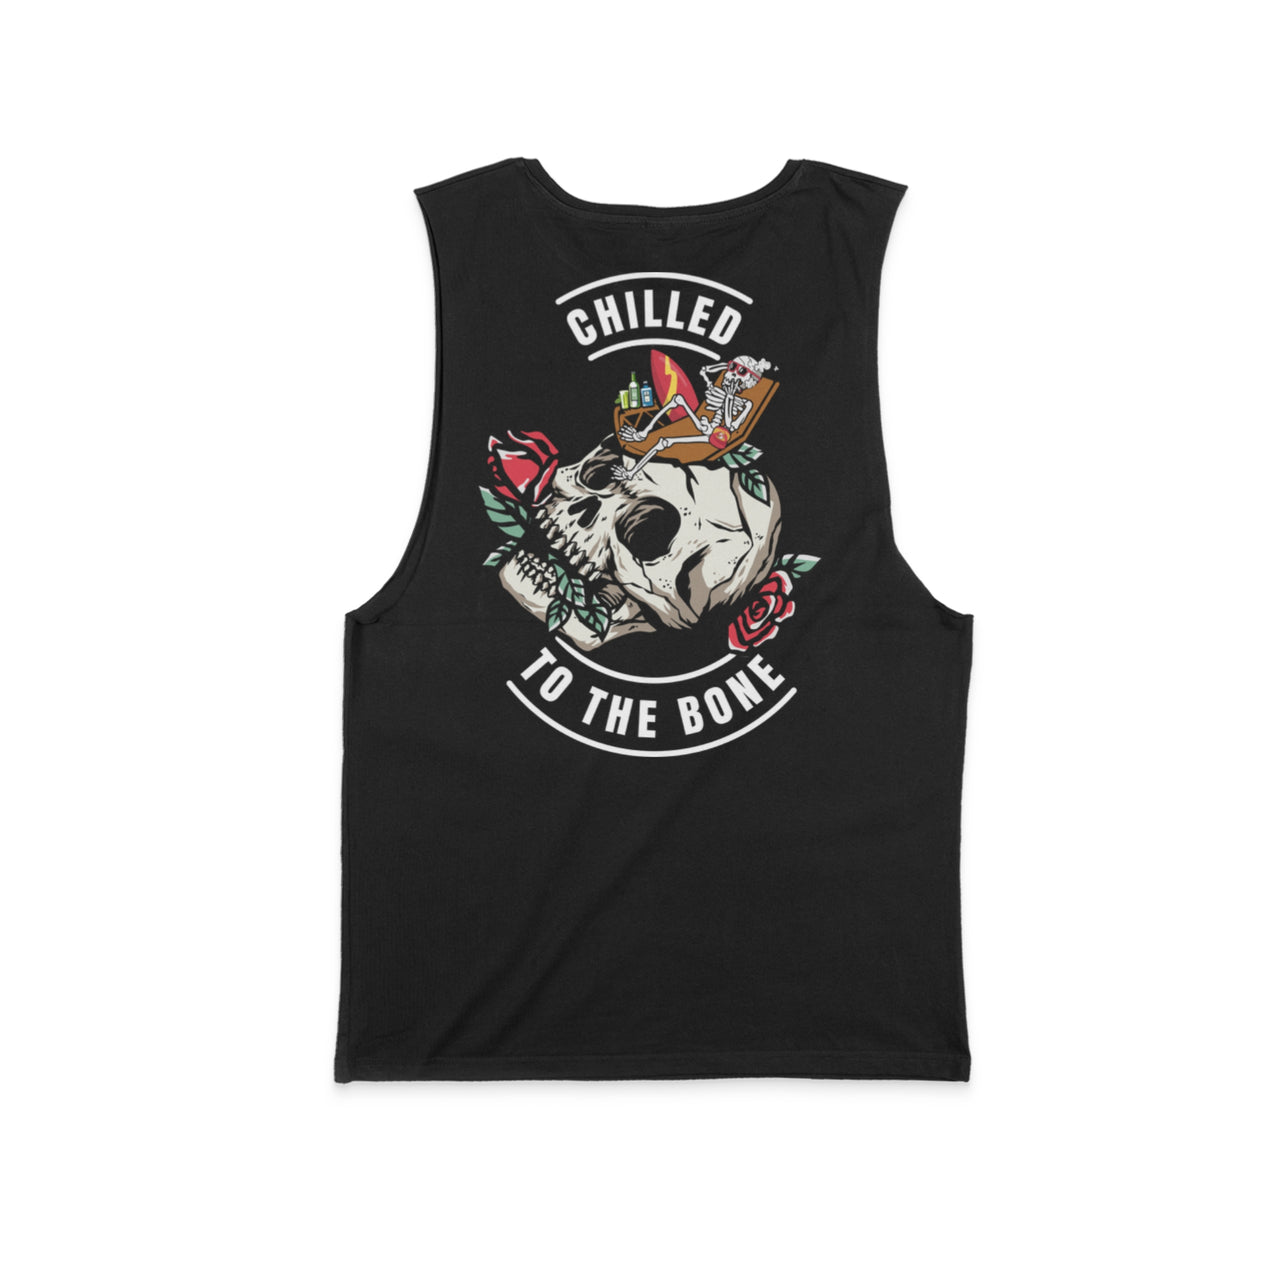 Chilled To The Bone Singlet